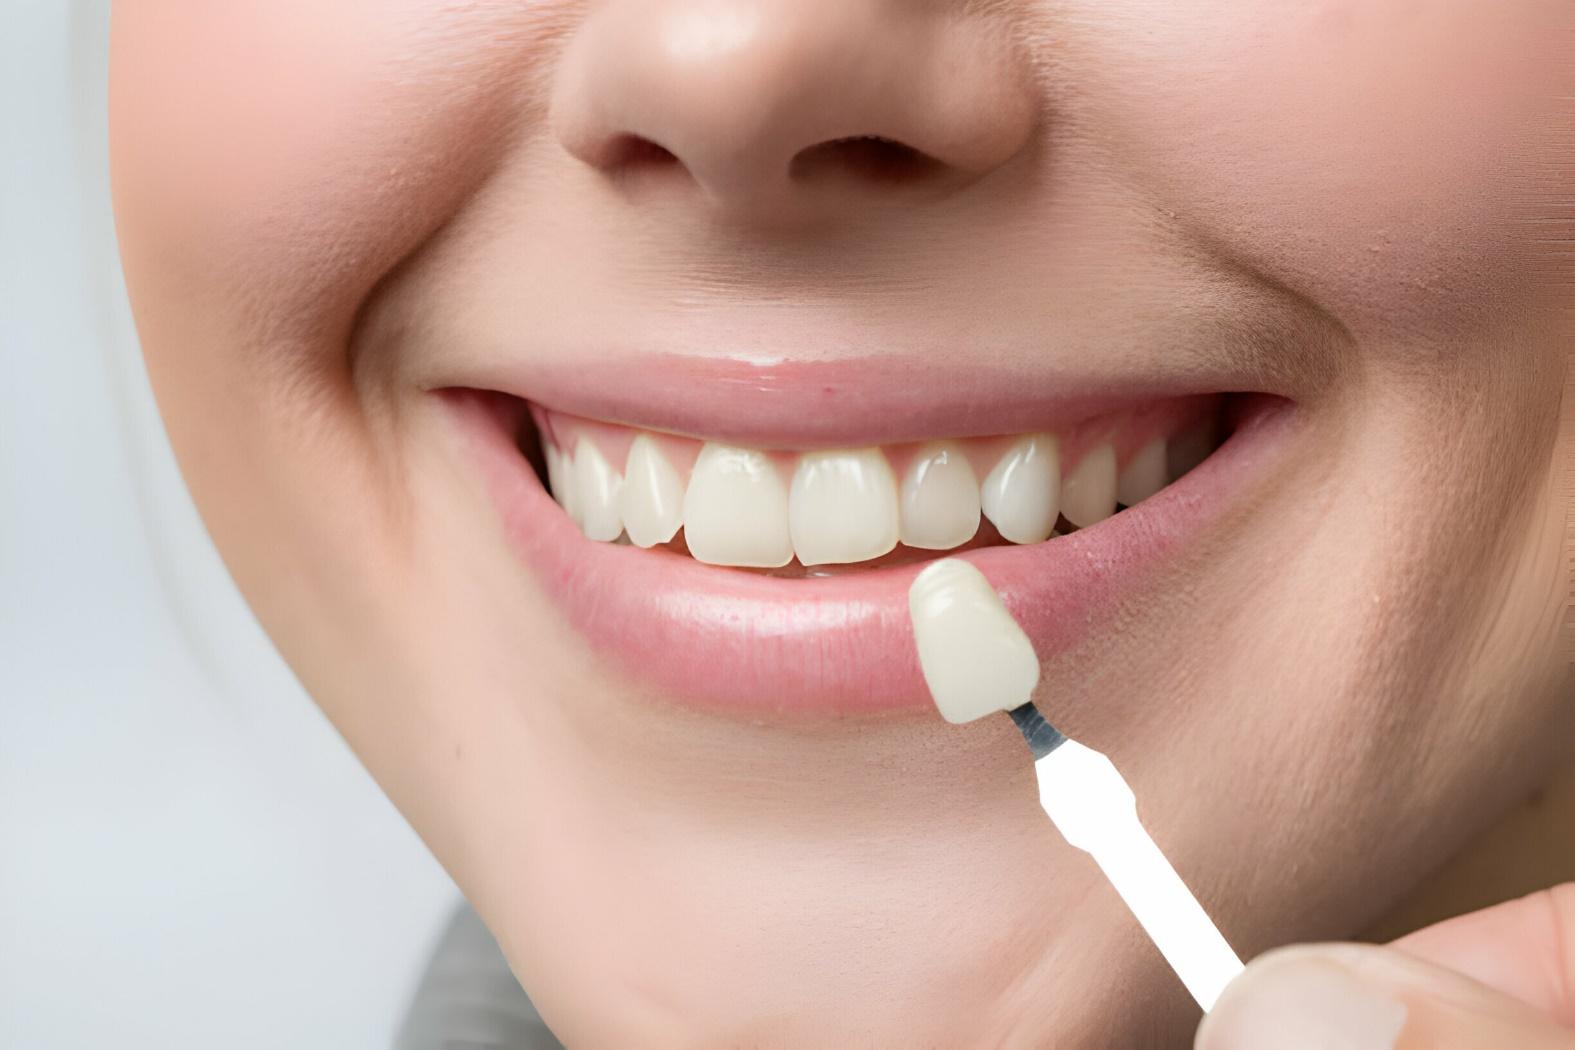 Cosmetic Dentistry Options: Enhancing Your Smile with Private Dental Treatments